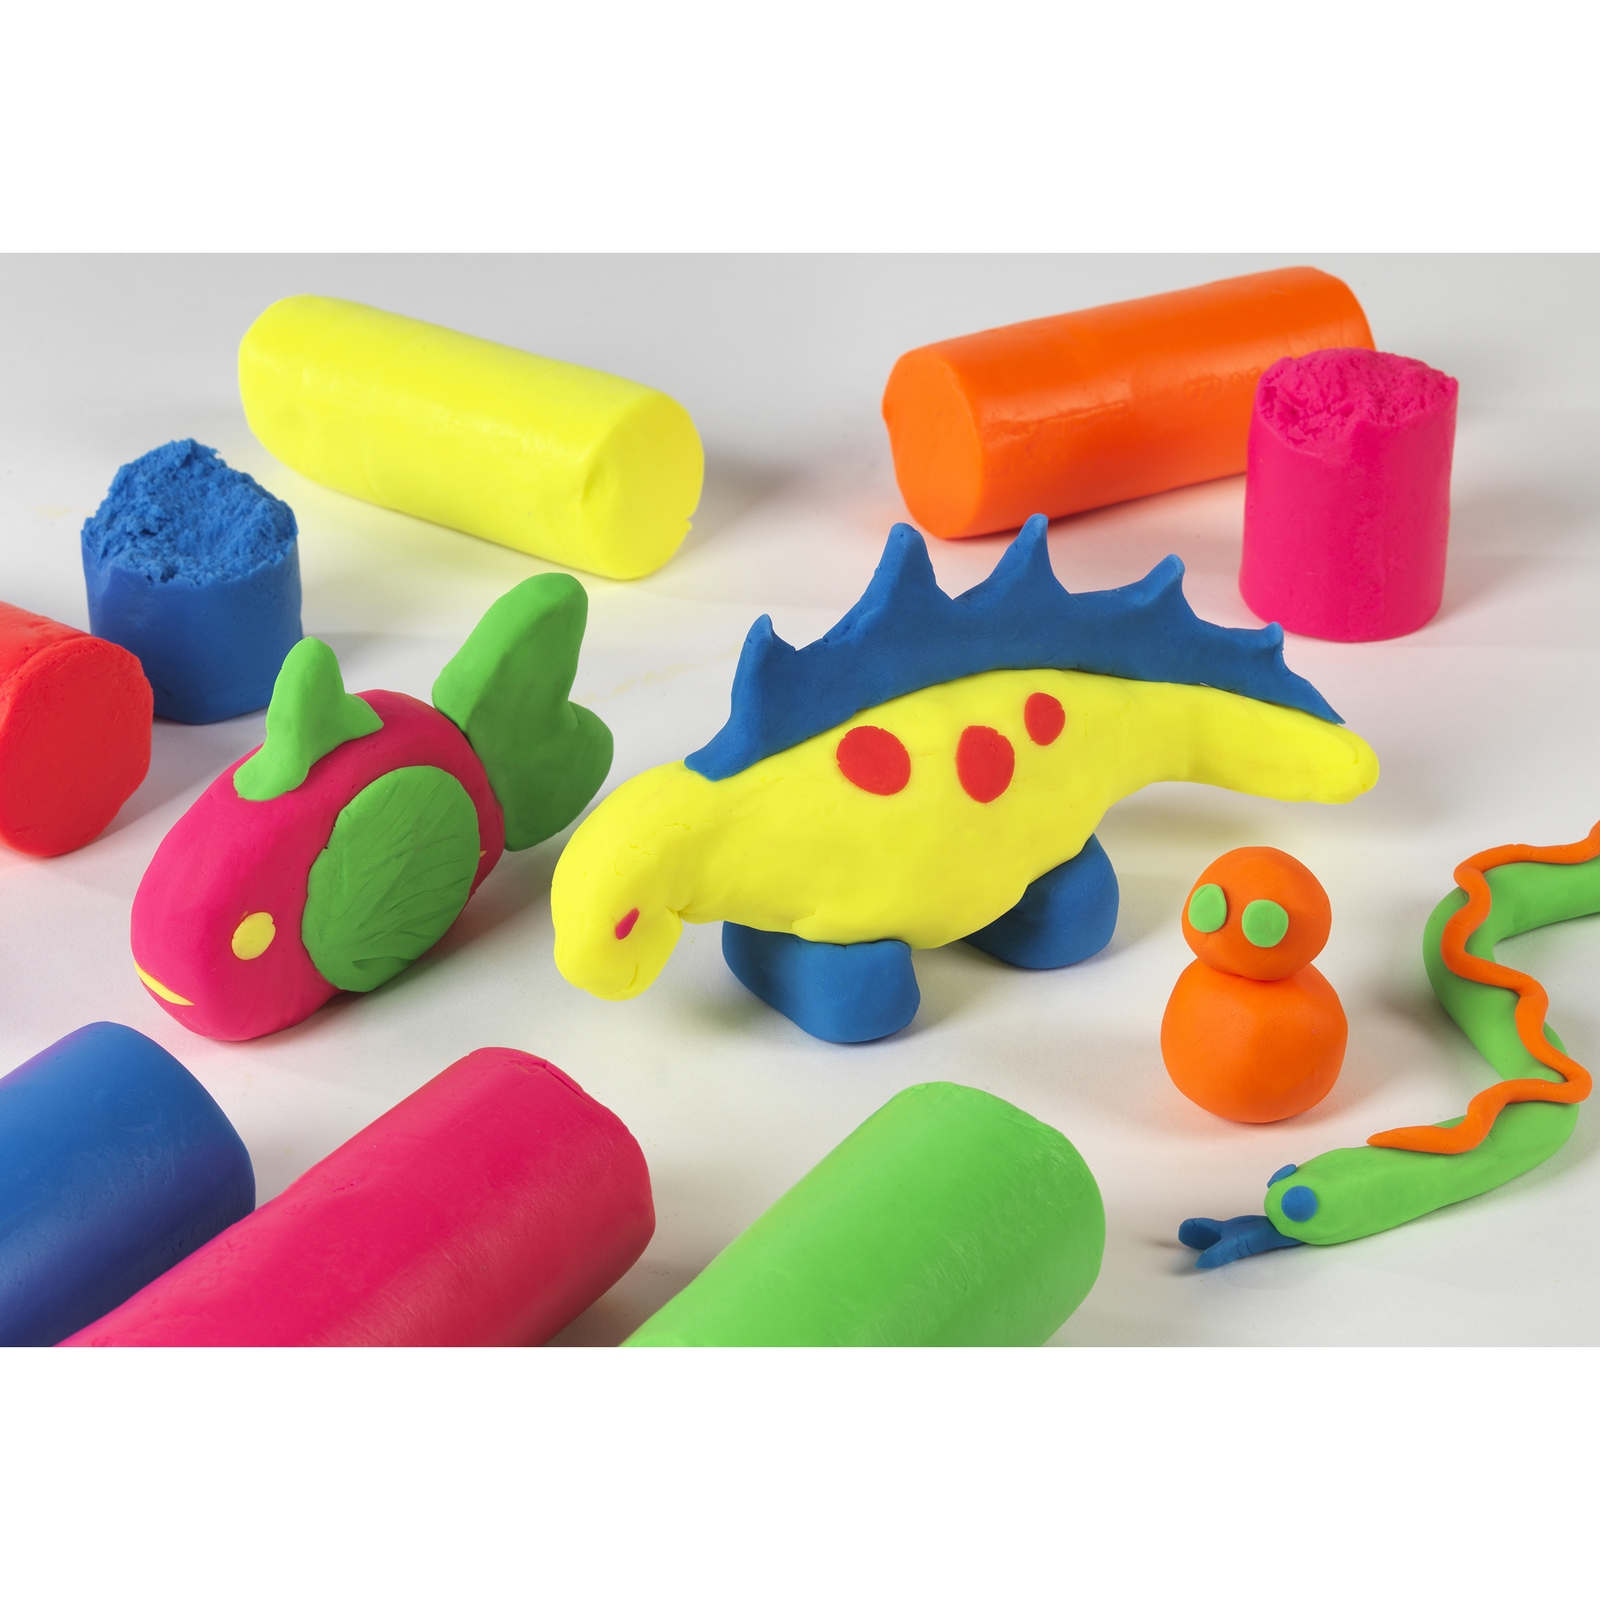 Finger Soft Dough Brights Pack of 6